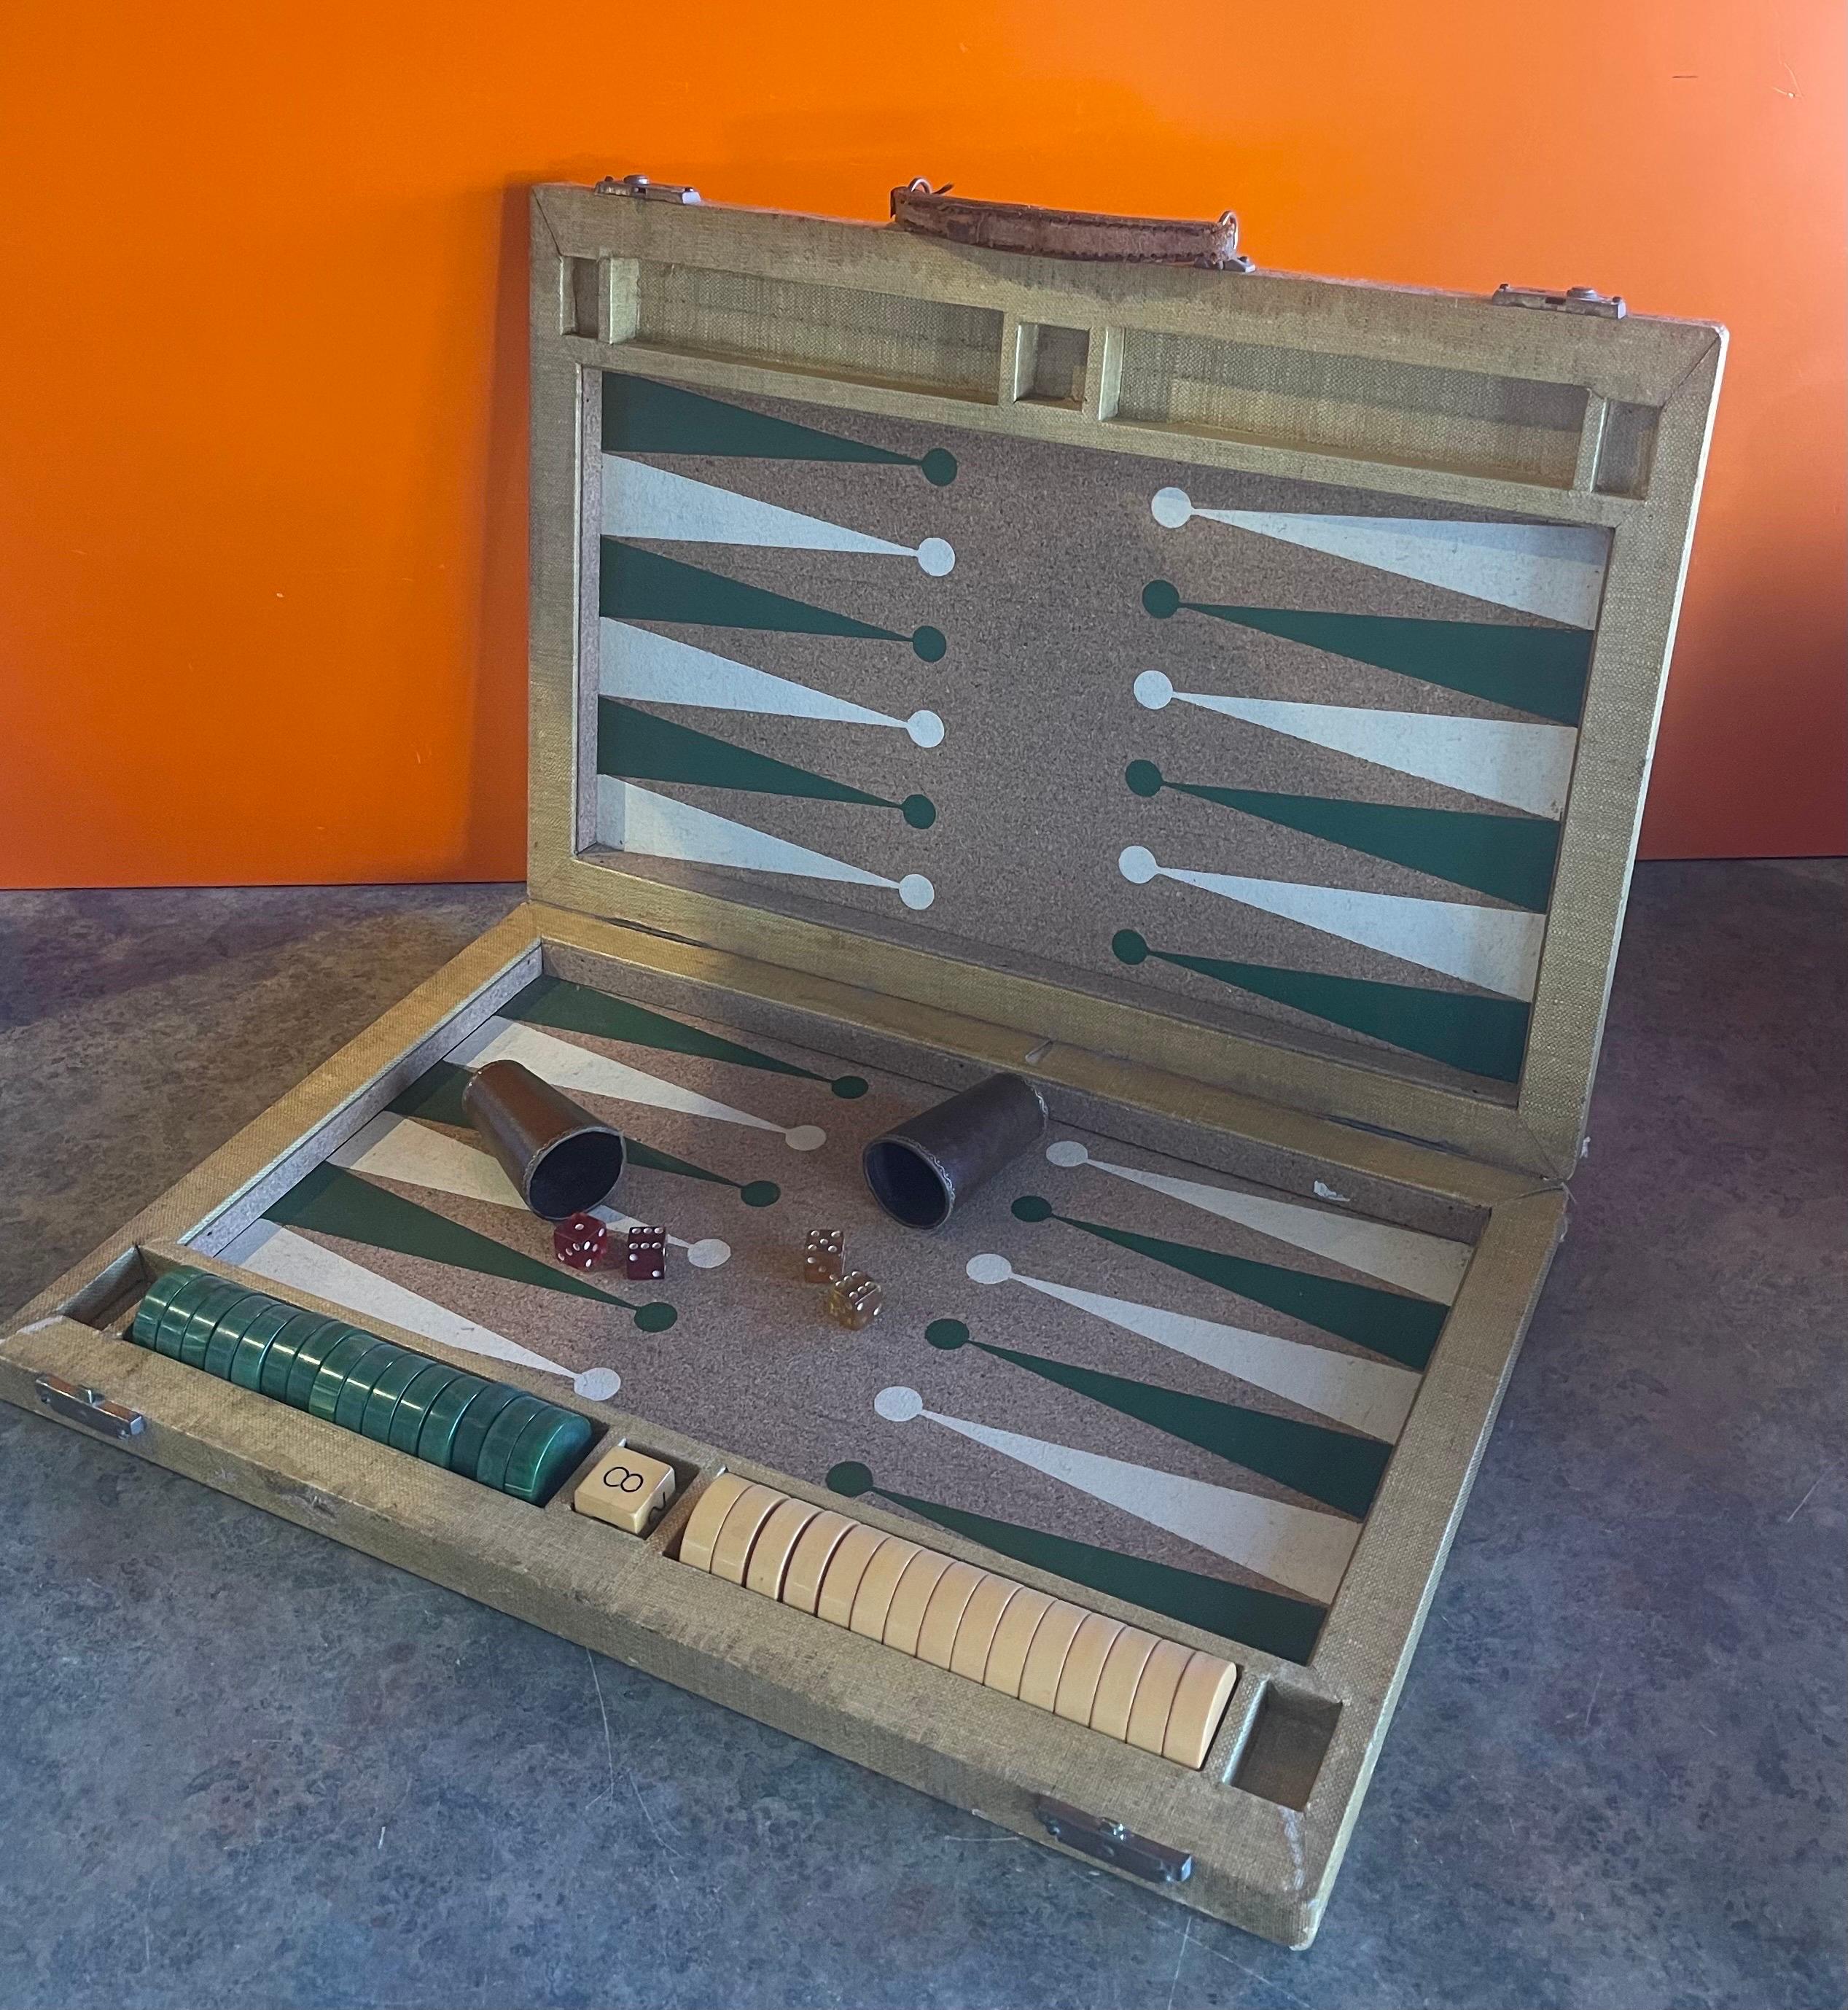 Vintage Art Deco cork and bakelite backgammon set, circa 1940s. Set is complete with a foldable case / board with cork inset, 30 bakelite checkers, doubling, two dice cups and two pair of vintage dice. Overall, the set is in good vintage condition